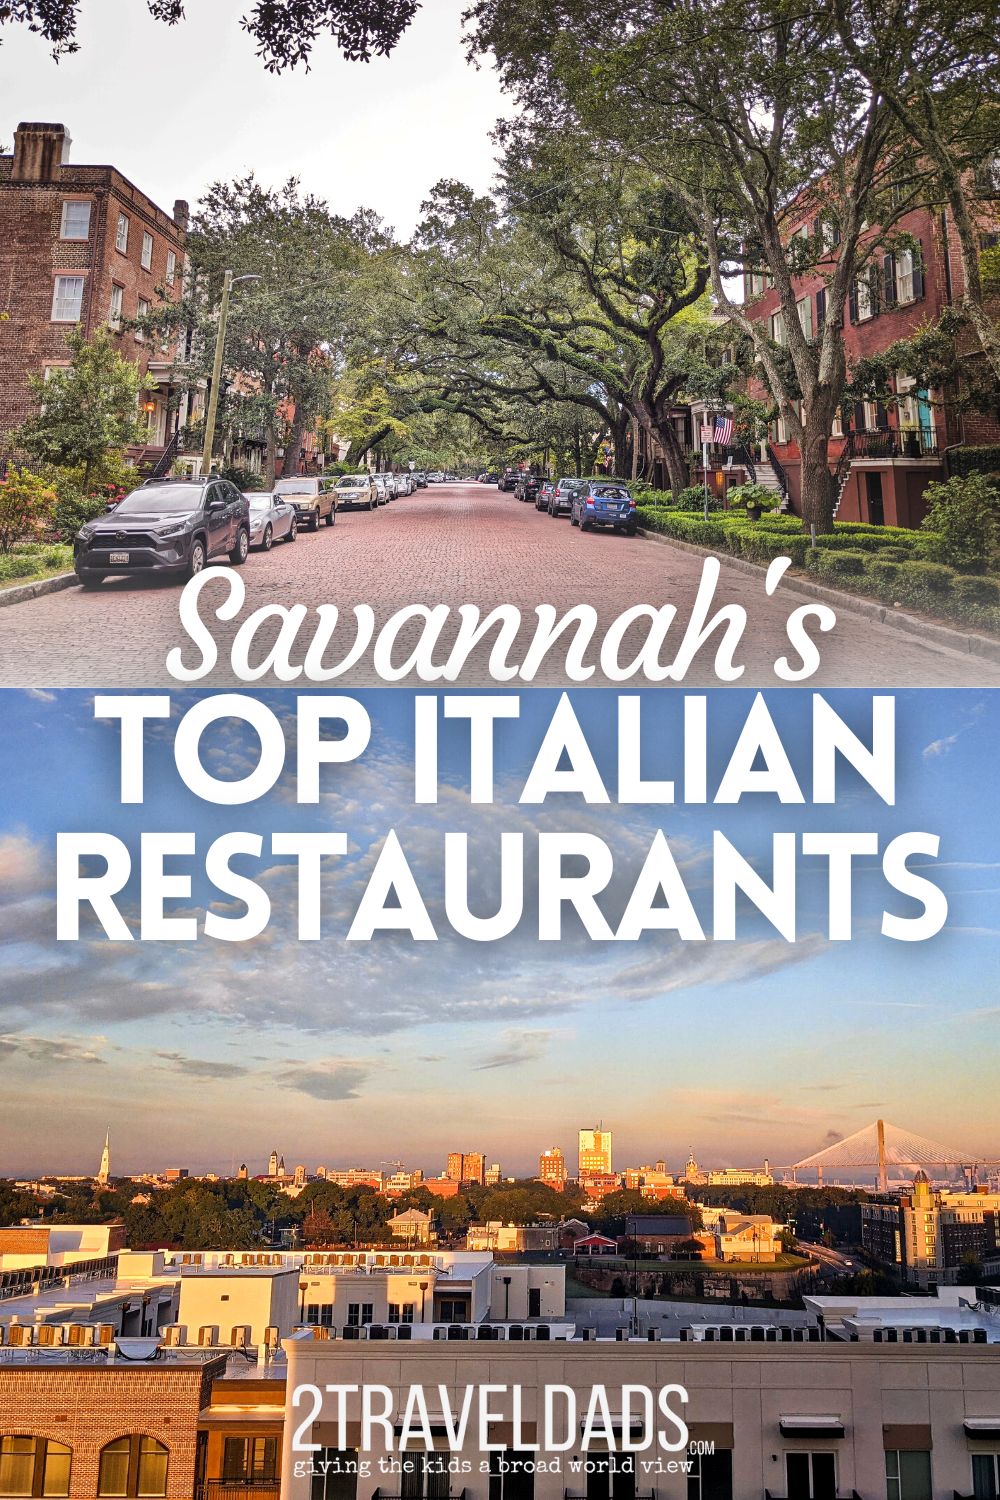 There are a shocking number of Italian restaurants in Savannah. We've picked our favorites, and yes, there are a lot of Neapolitan style pizza spots, but you'll love each of these delicious choices.